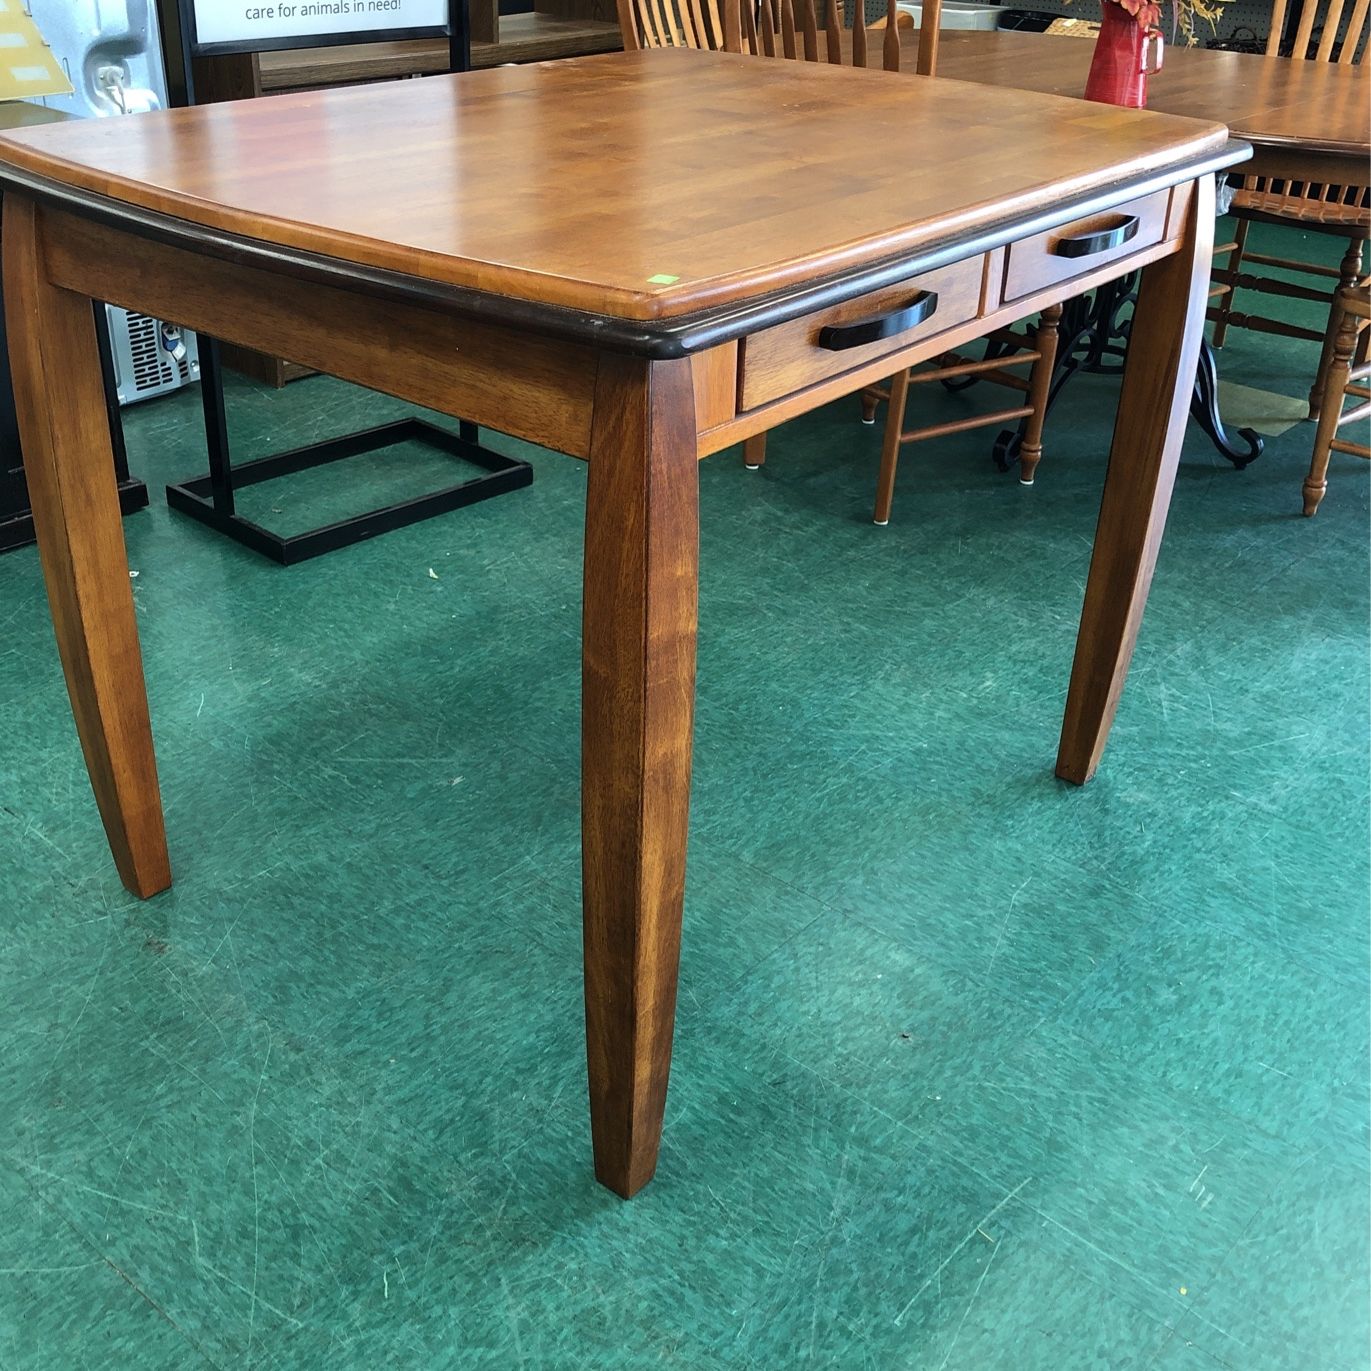 High Top Dining Game Table With Drawers For Storage